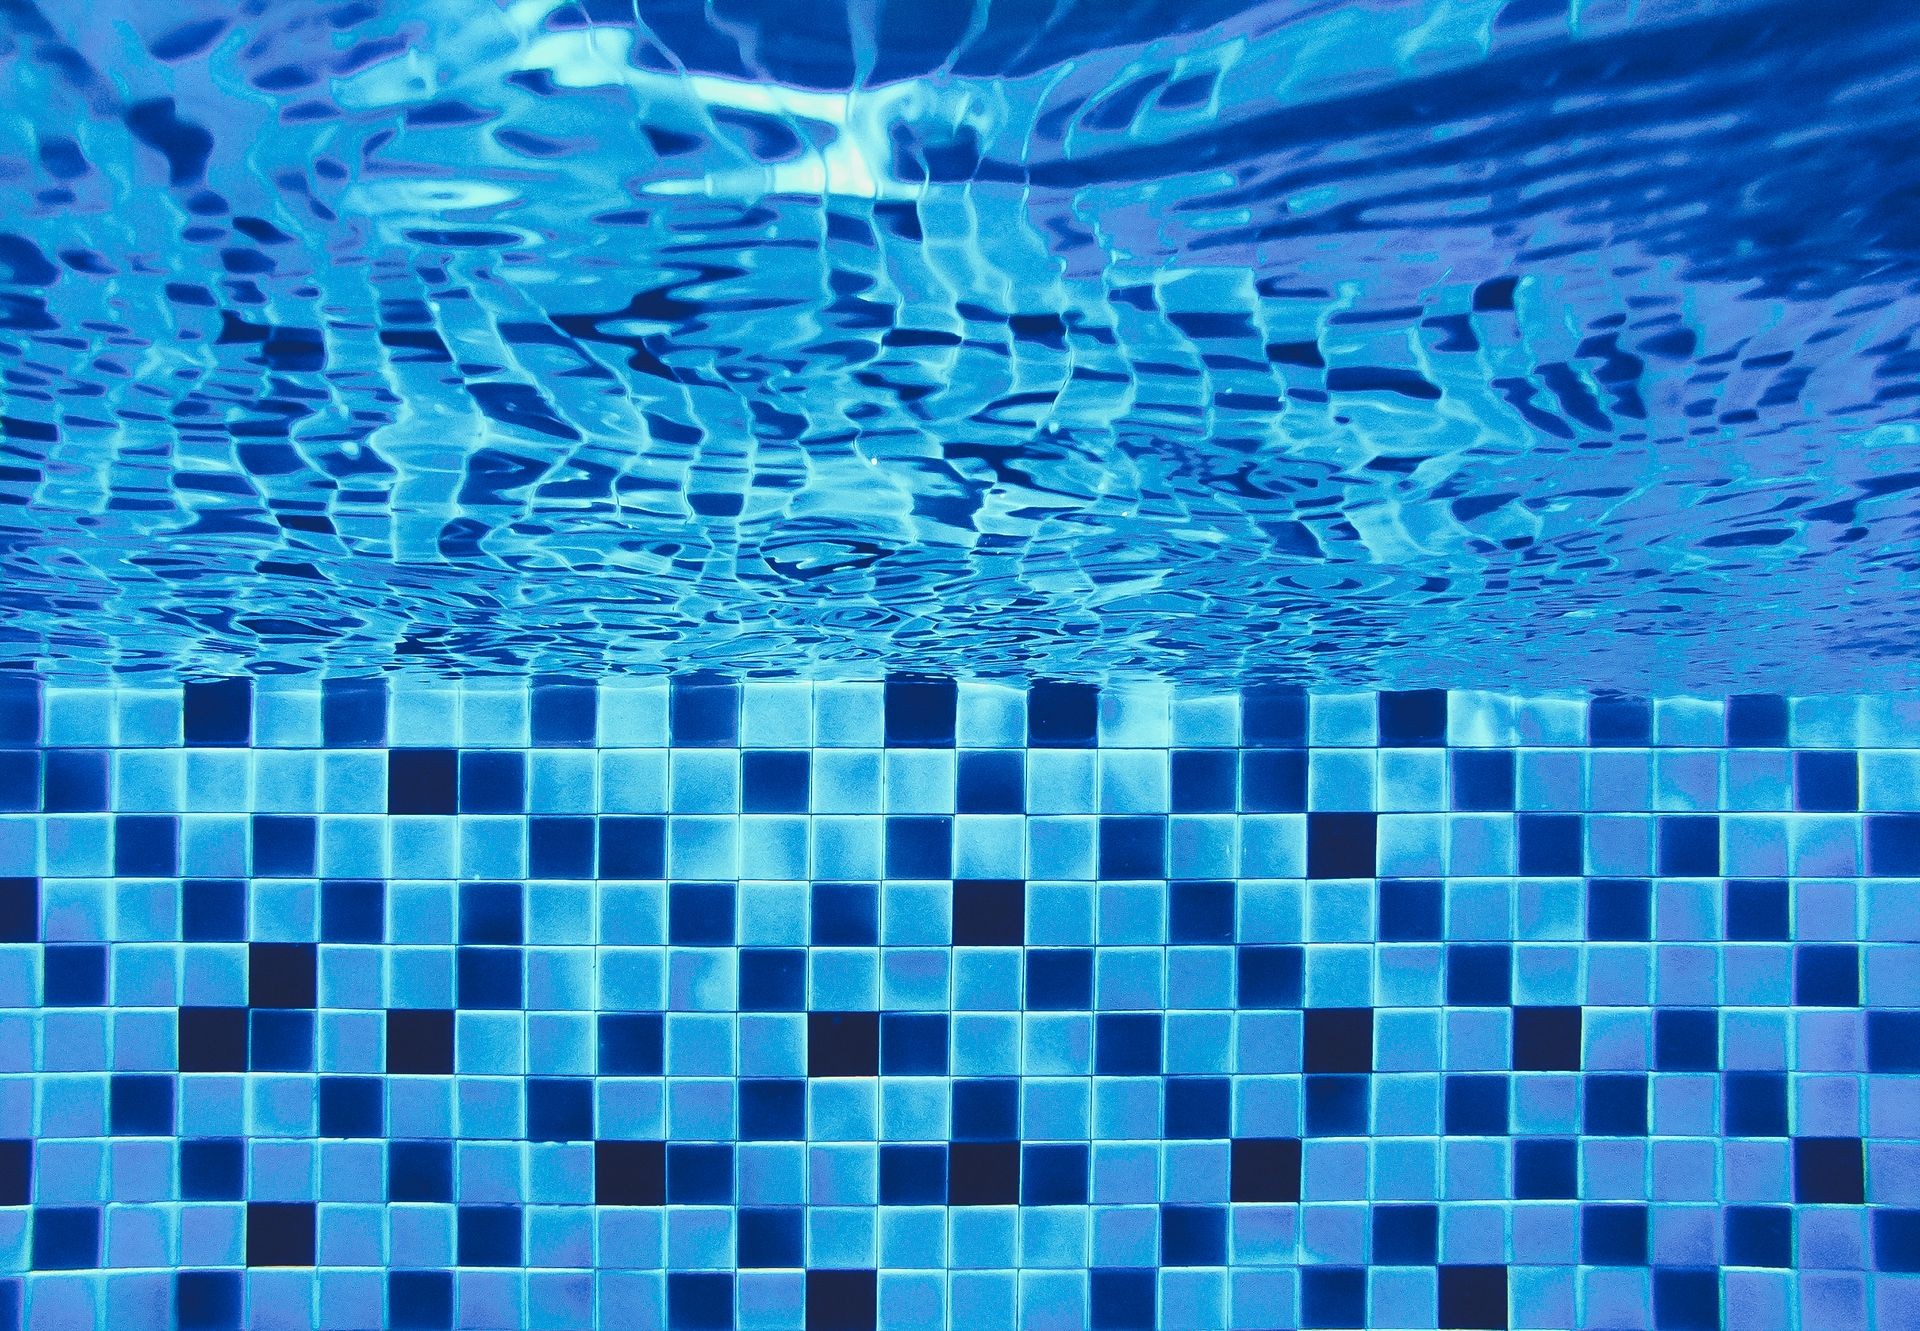  underwater in the swimming pool and mosaic tiles blend ocean